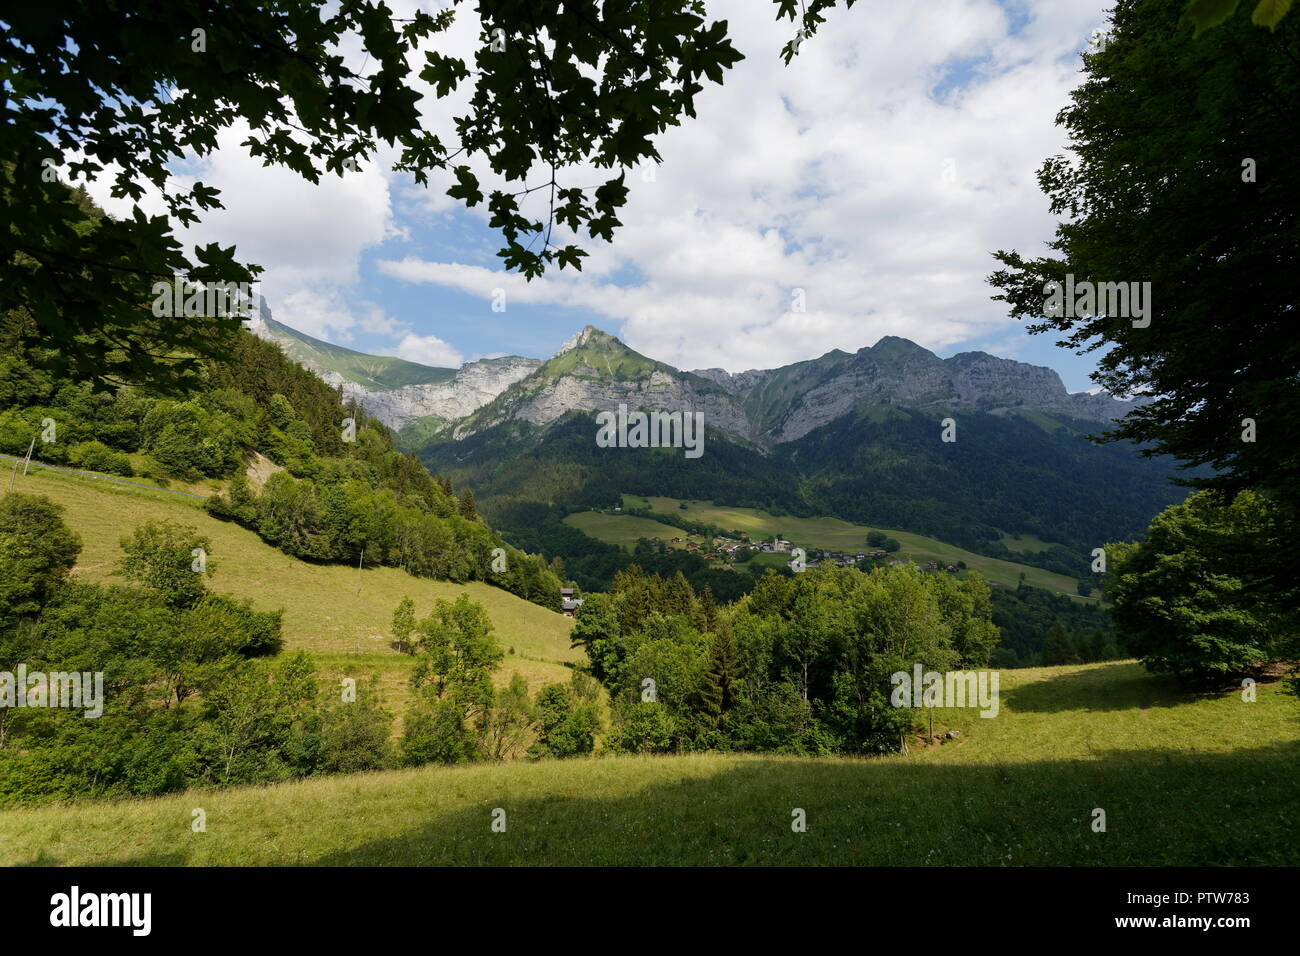 View of  Montmin nestled in the valley through tree foliage below Col de la Forclaz France Stock Photo